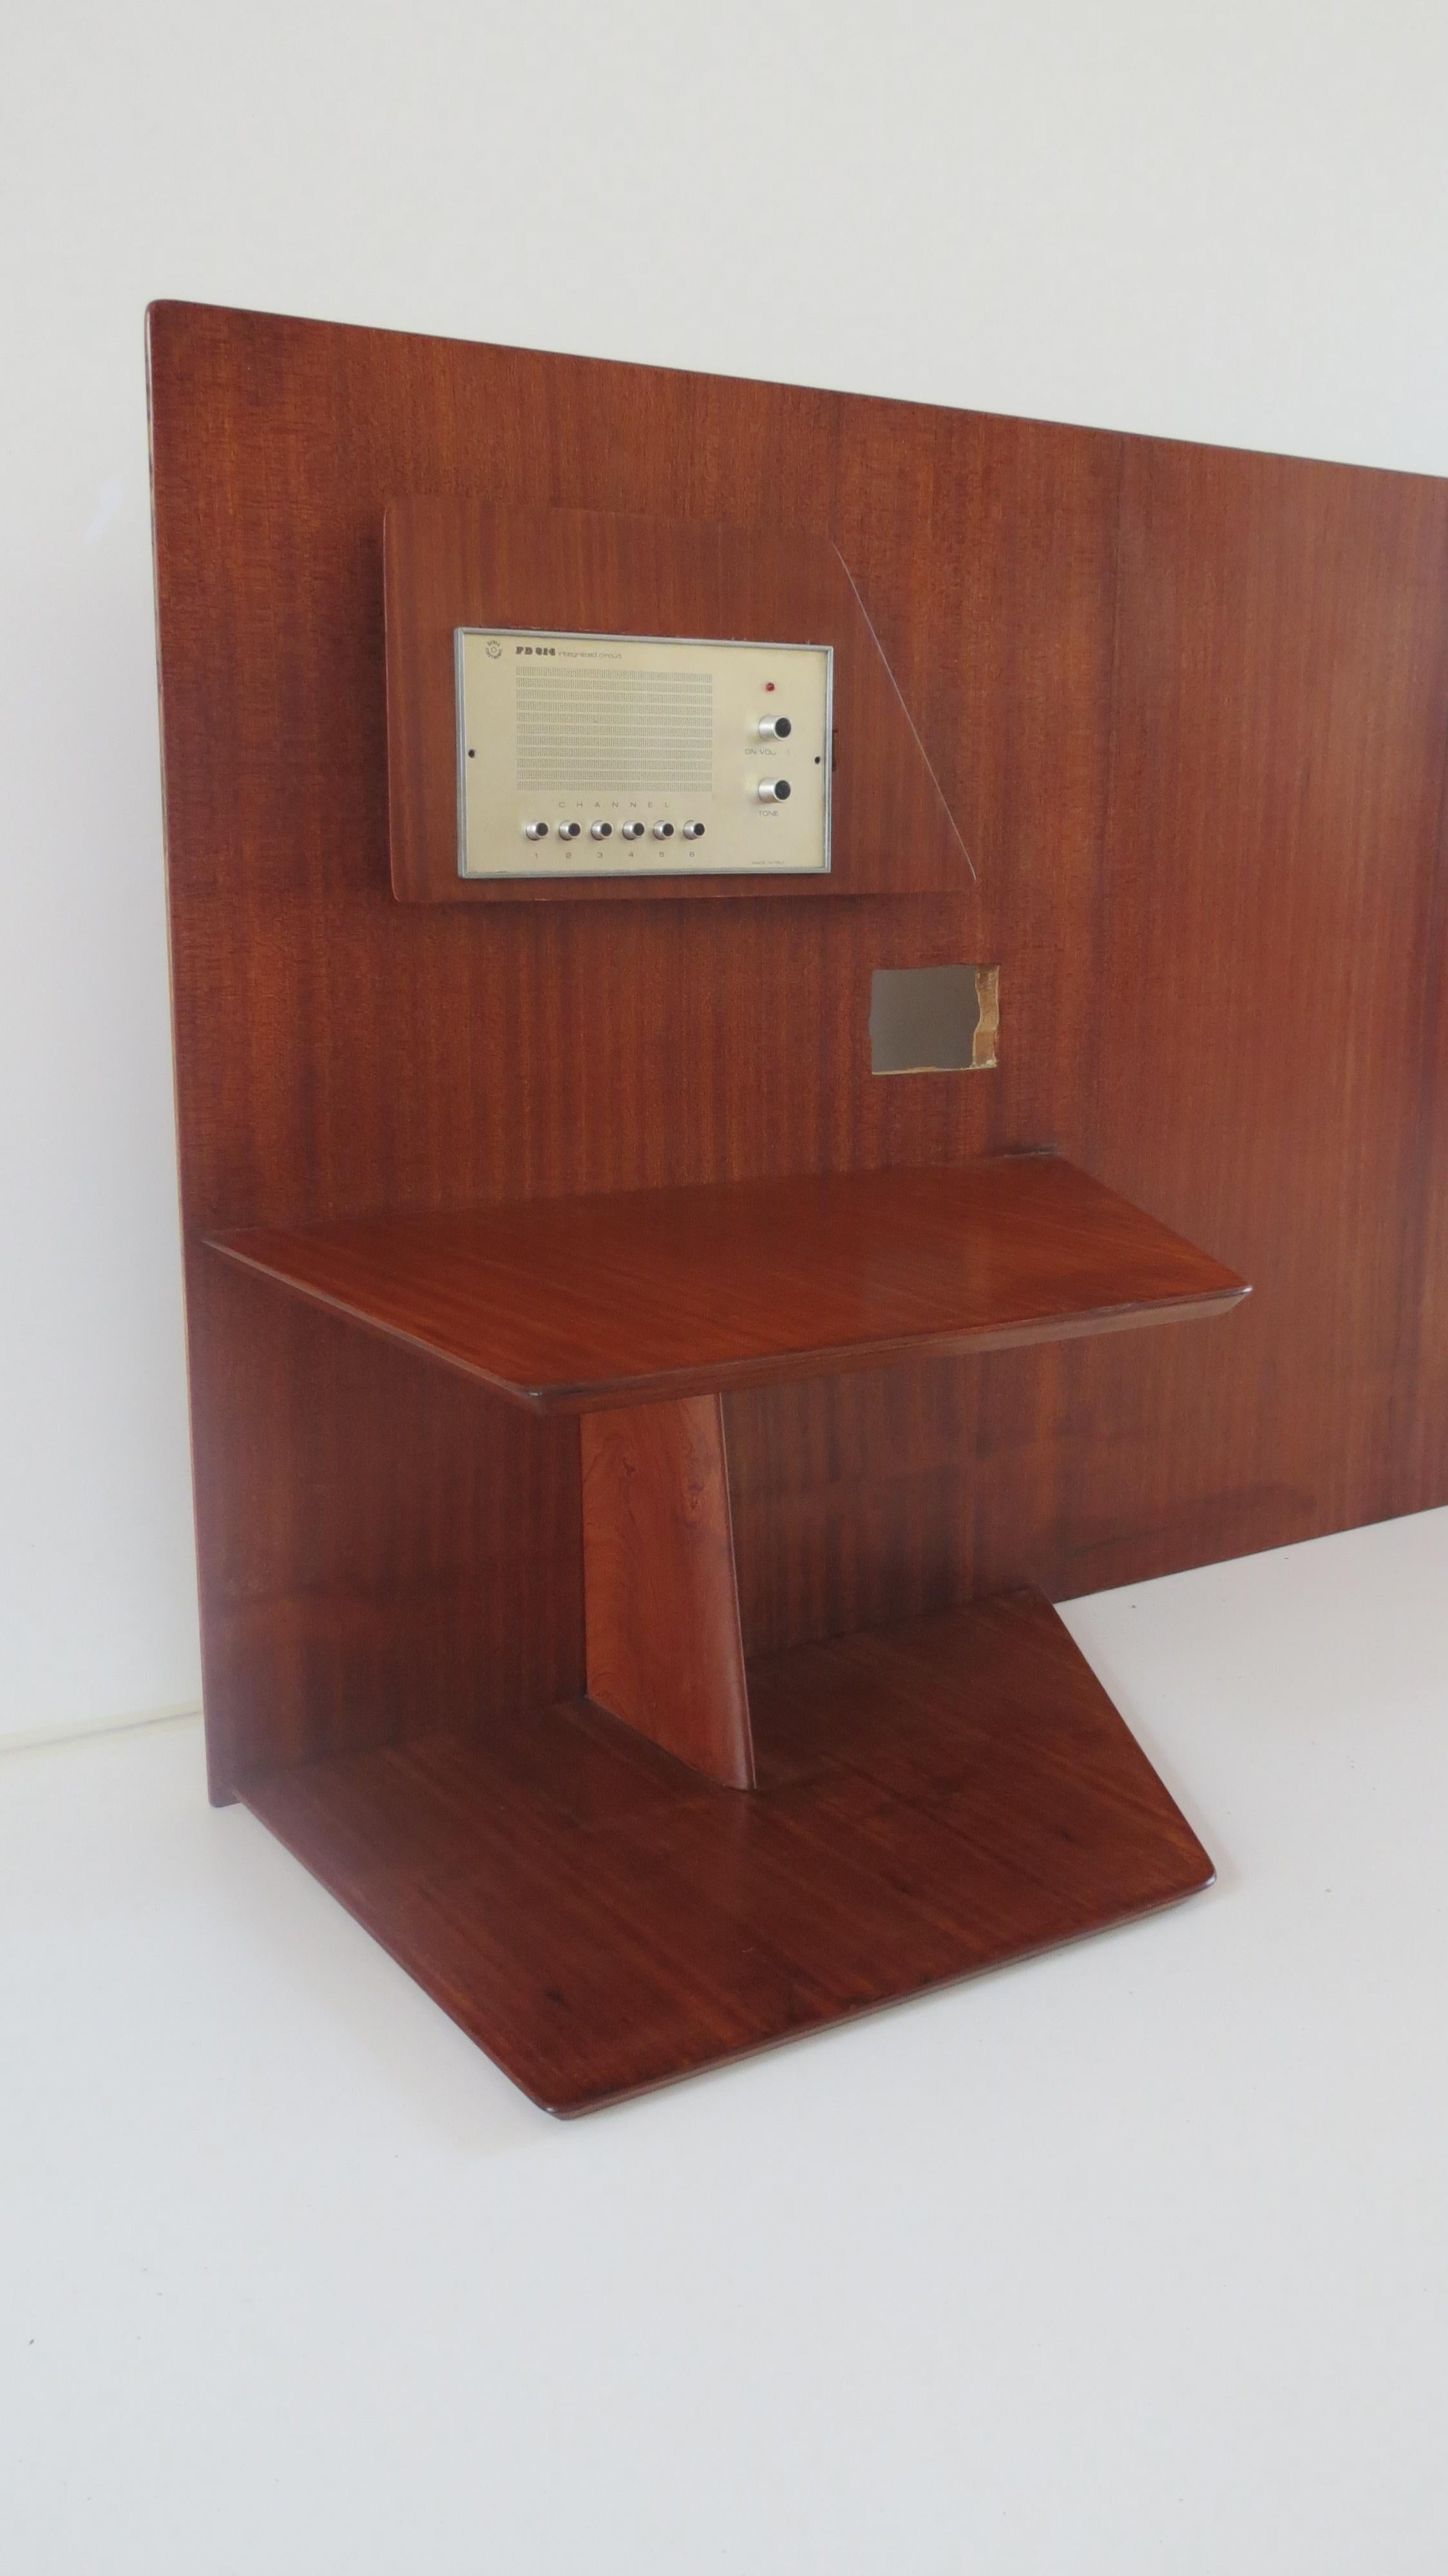 A pair of headboards by Gio Ponti from the furniture of the Hotel Royal in Naples, 1955.
Manufactured by Giordano Chiesa by Dassi
mahogany veneered wood with two tiered shelving and radio unit.
Very good condition, good original patina
Sold with